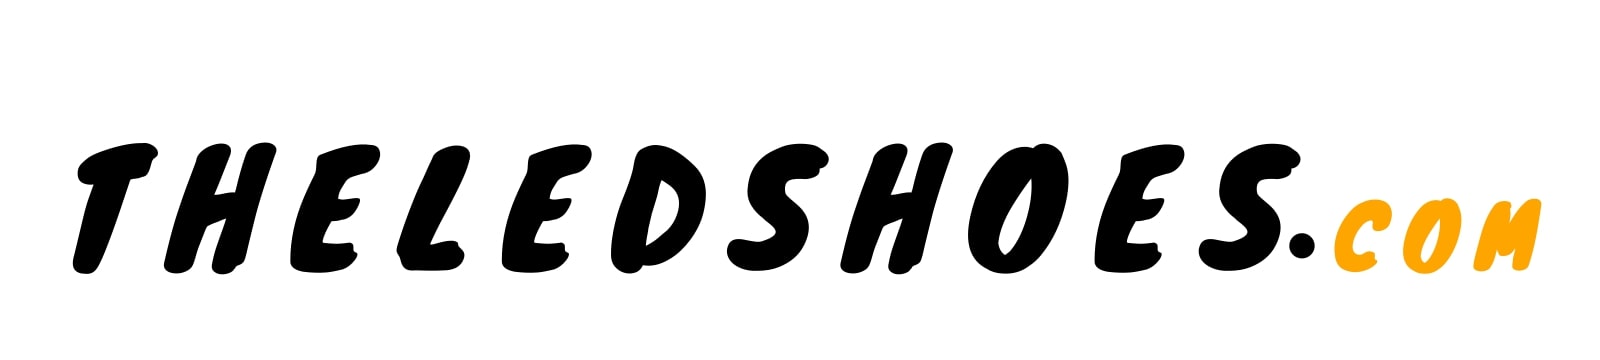 theledshoes.com